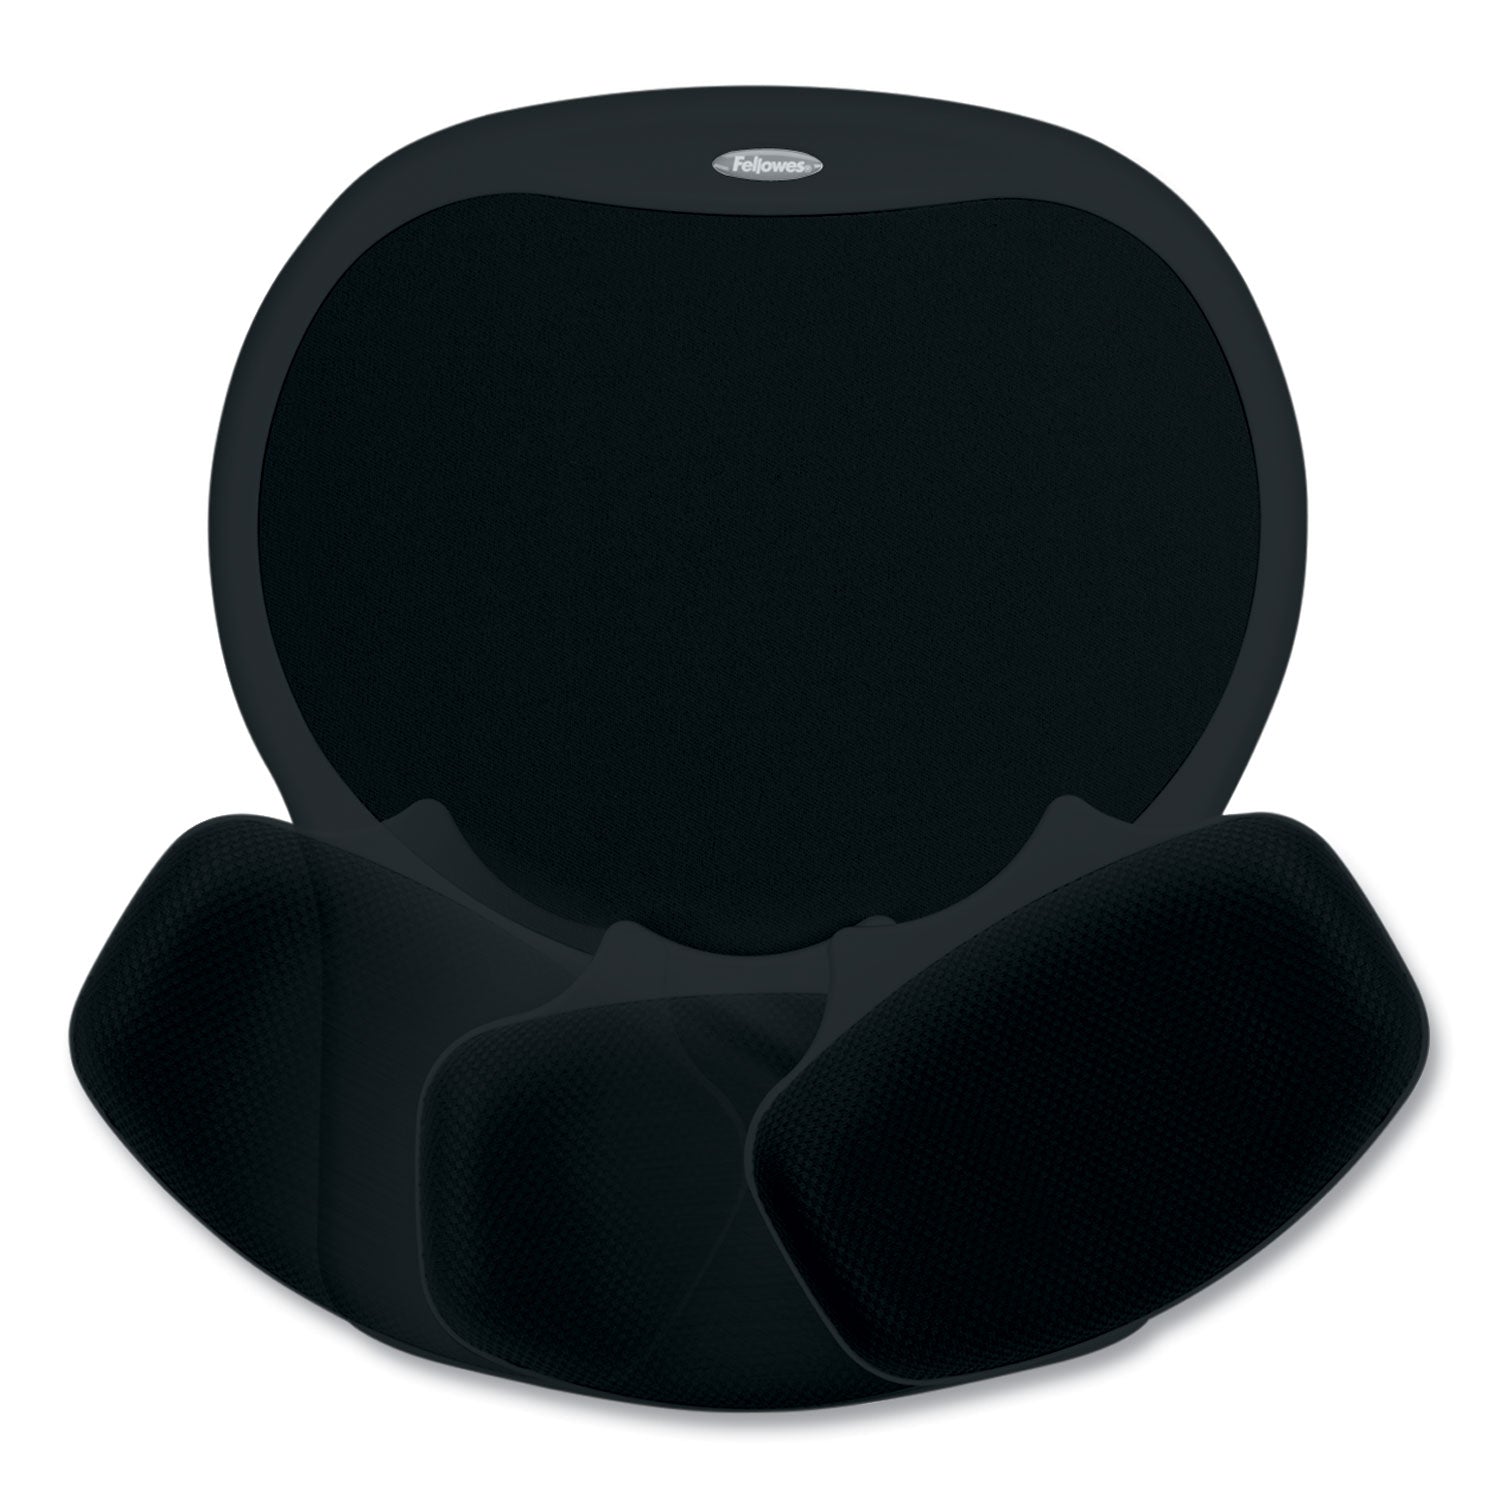 Easy Glide Gel Mouse Pad with Wrist Rest, 10 x 12, Black - 